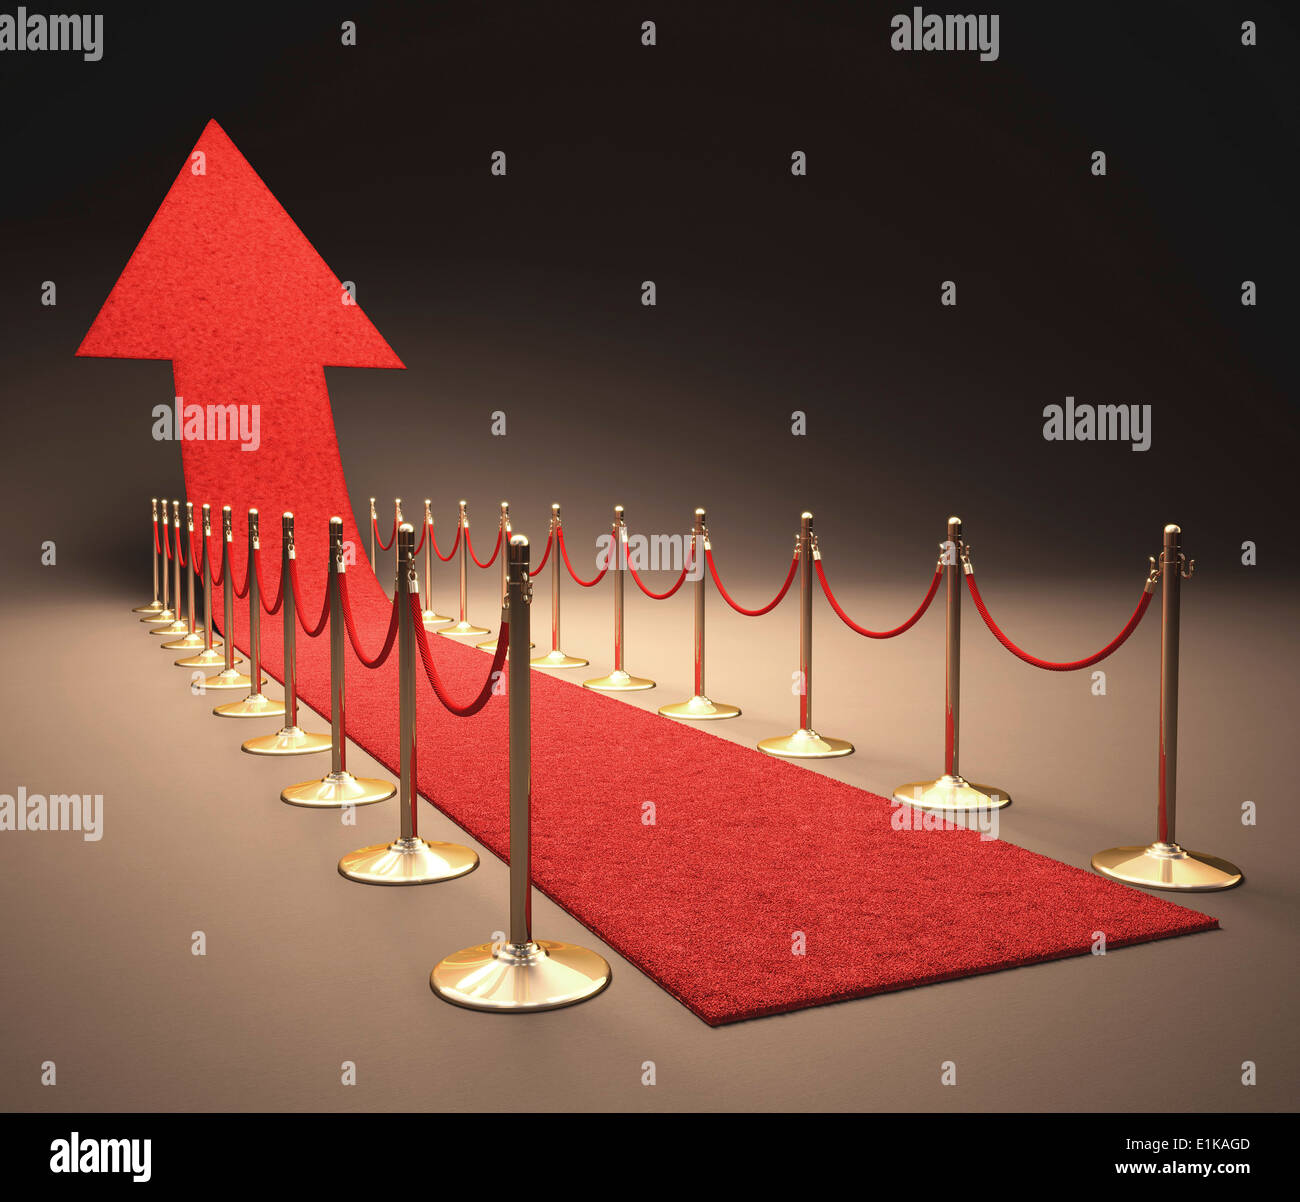 Red carpet with a red arrow pointing upwards computer artwork. Stock Photo